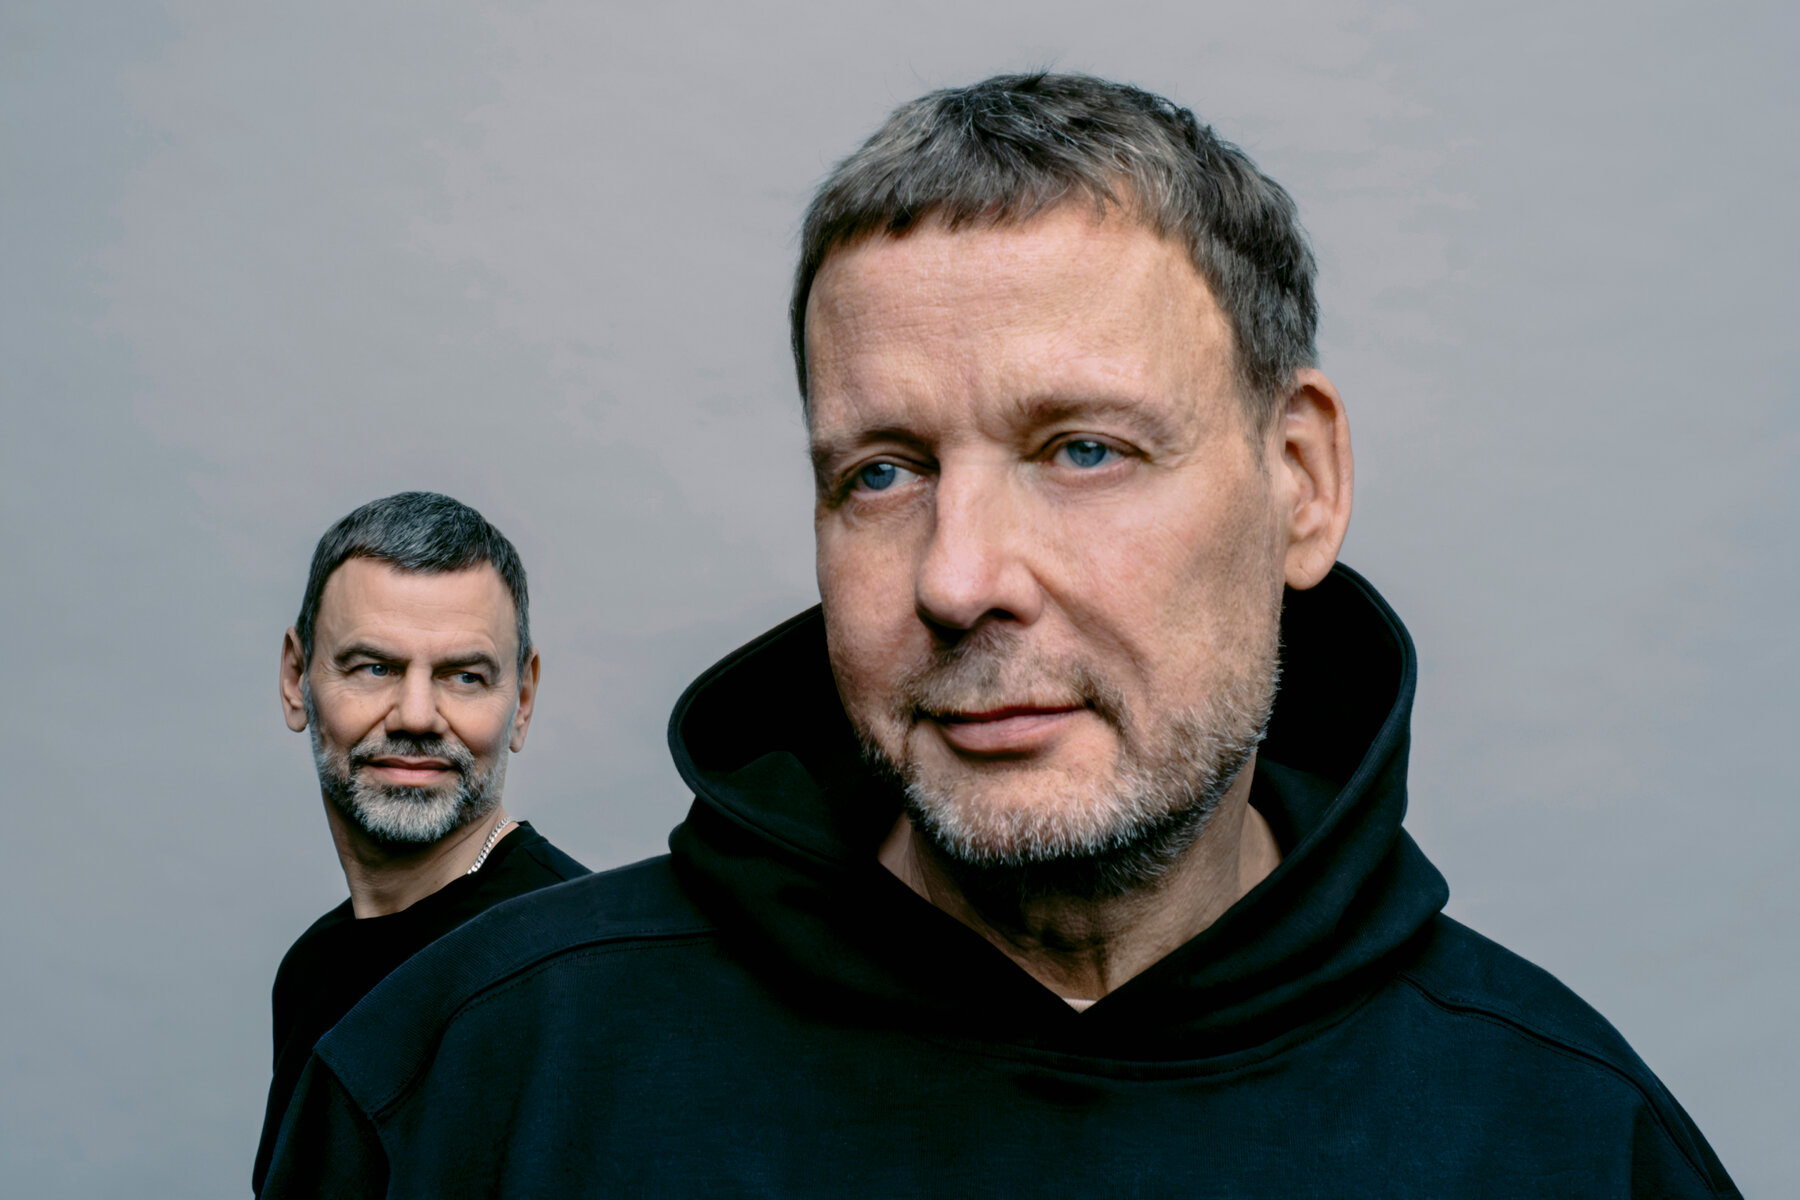 A portrait of Dragset and Elmgreen smiling and standing in front of a gray background. Dragset wears a black T-shirt and Elmgreen wears a black hoodie.